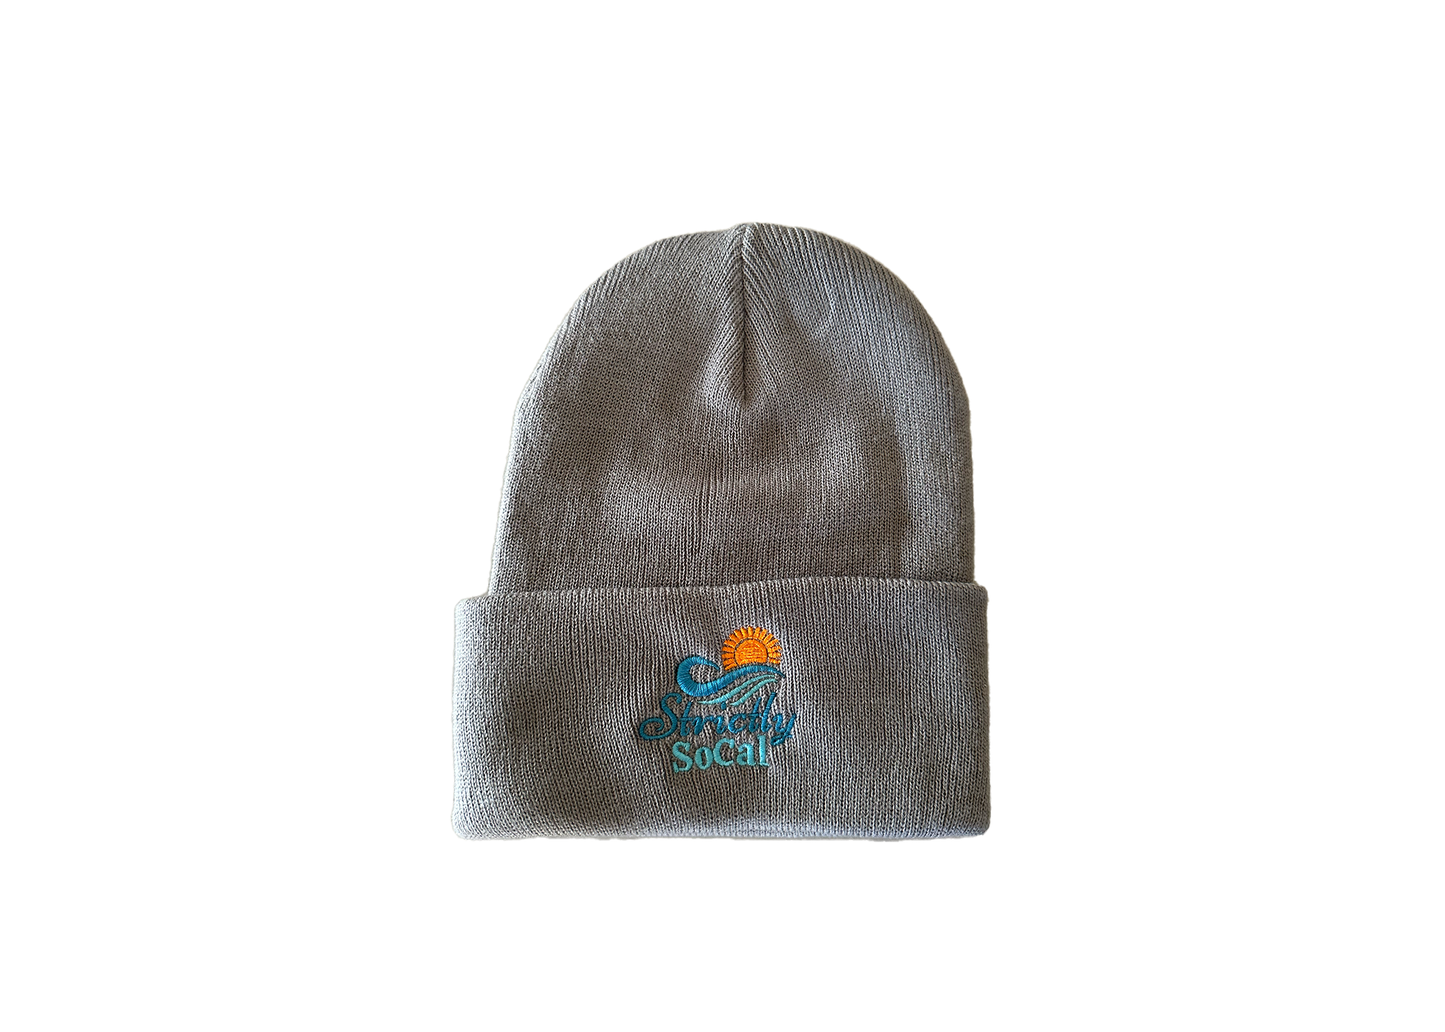 Strictly SoCal Beanie